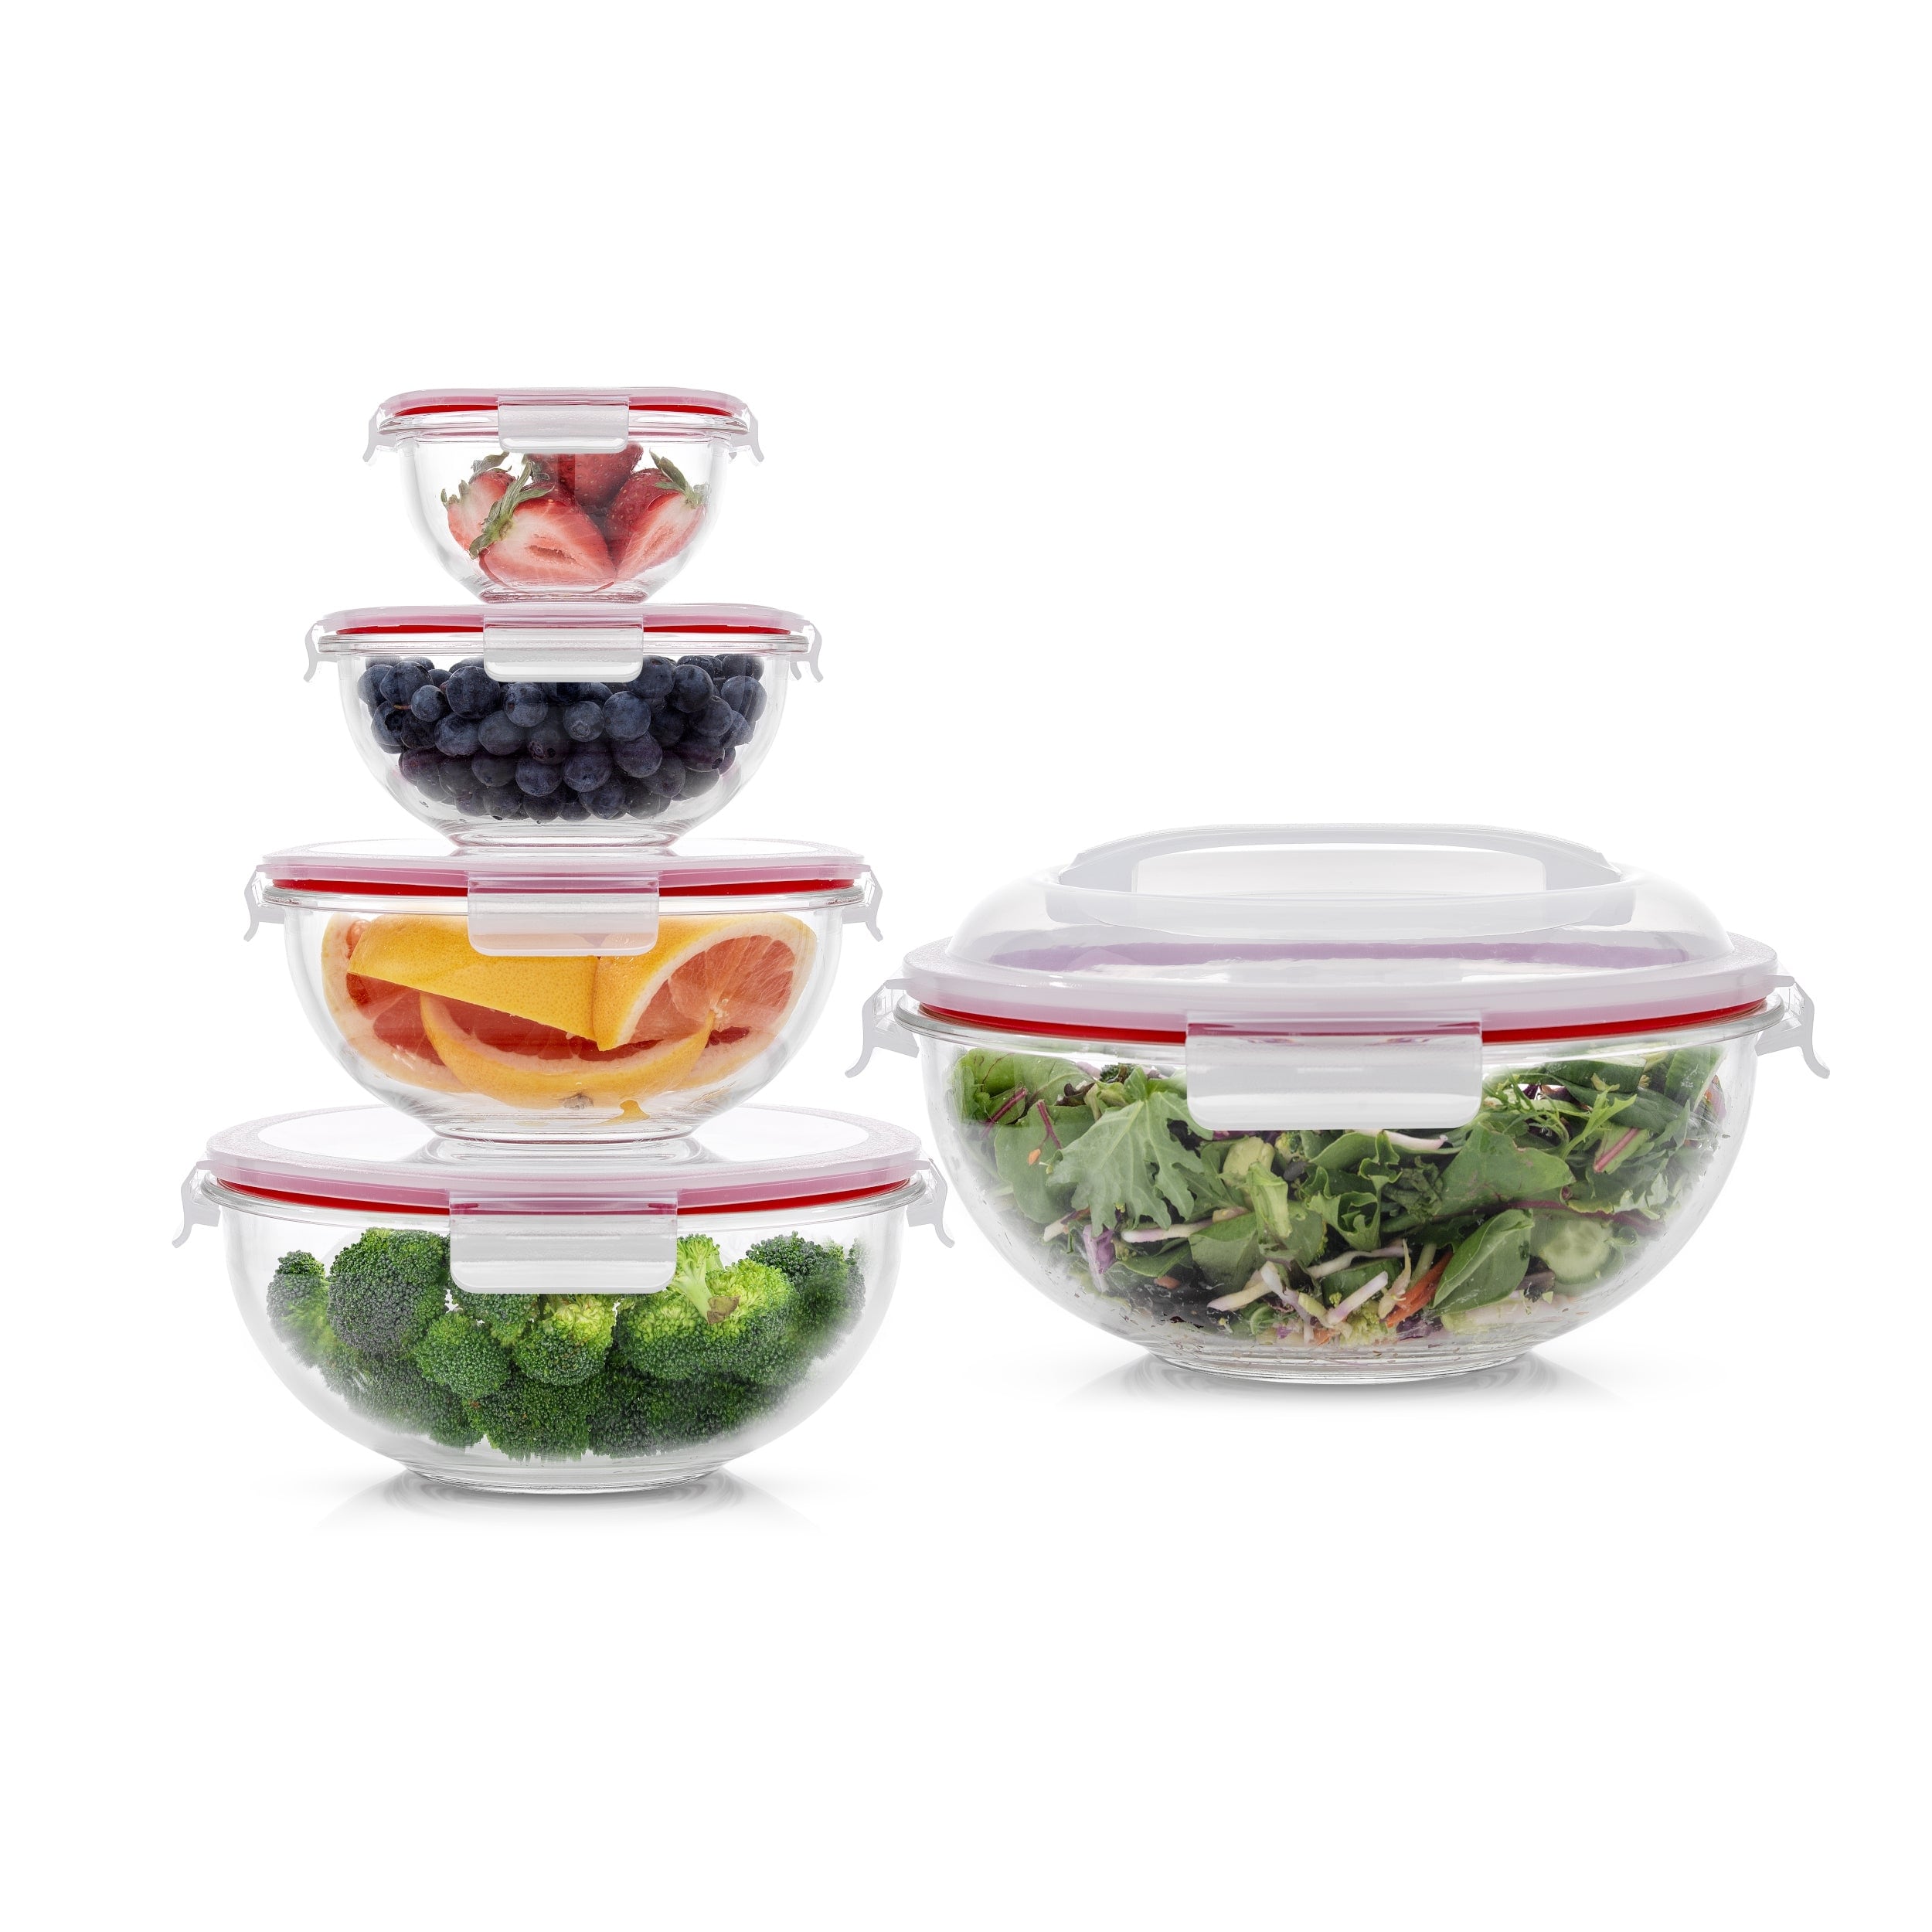 https://ak1.ostkcdn.com/images/products/is/images/direct/897a3fb6969ce7e6a2dc1fcdb62c51ac748cd9a1/JoyFul-by-JoyJolt-5-Piece-Glass-Food-Mixing-Bowls-With-Lids.jpg